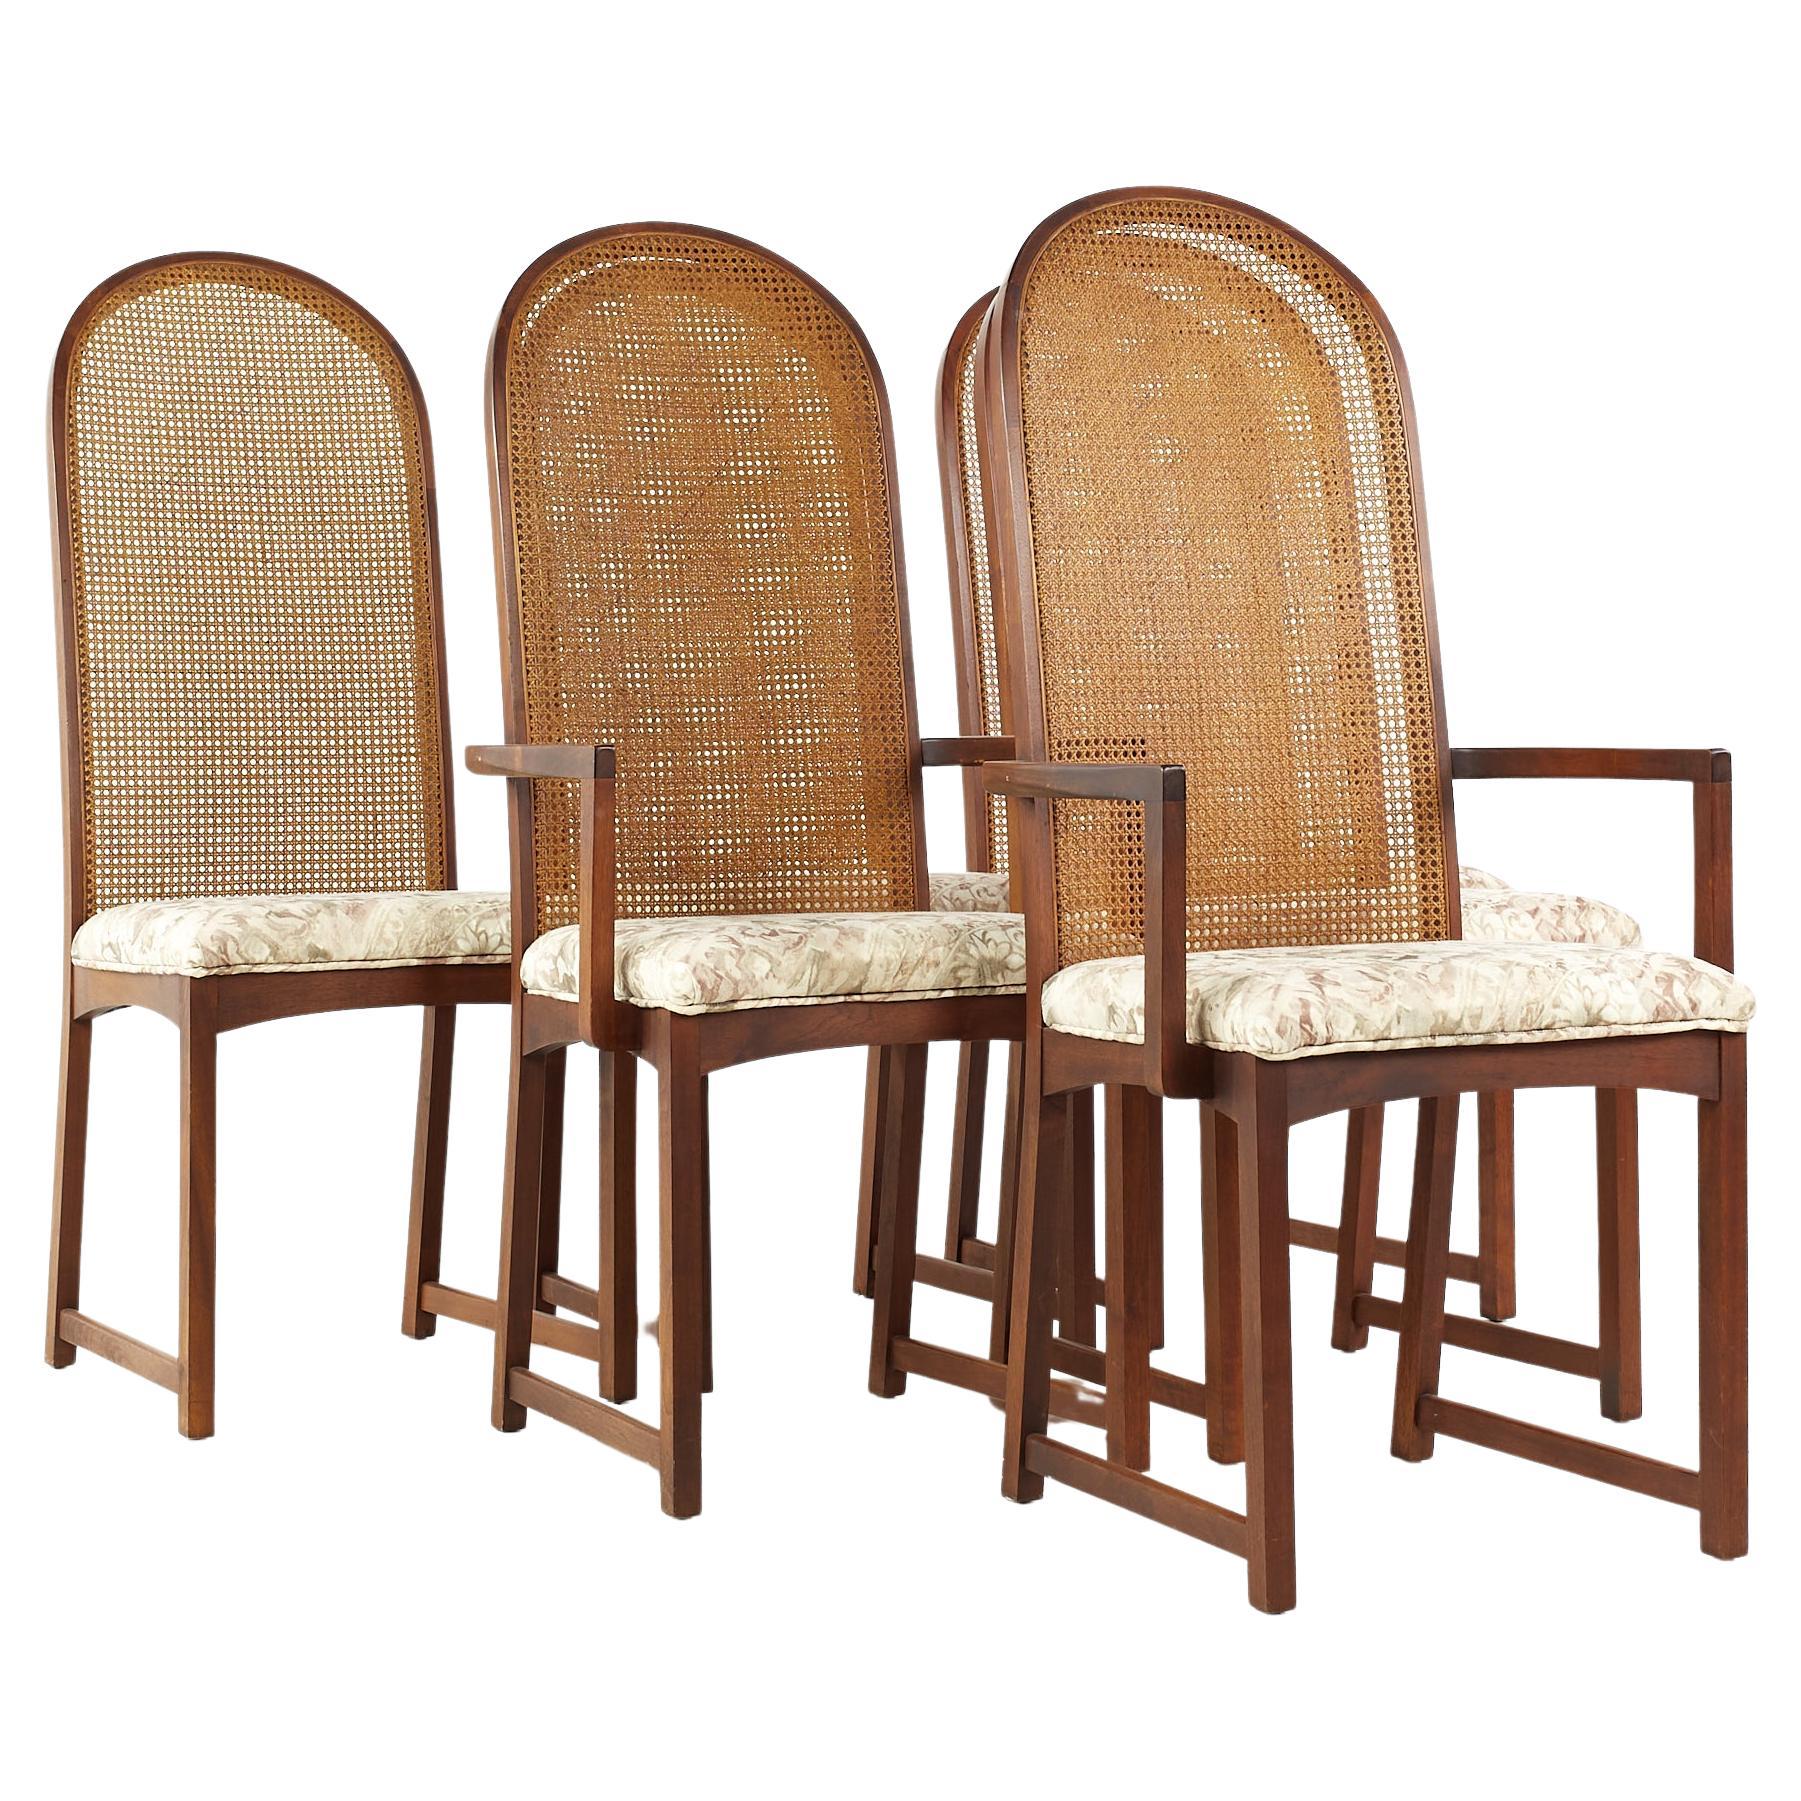 Milo Baughman for Directional MCM Walnut and Cane Back Dining Chairs - Set of 6